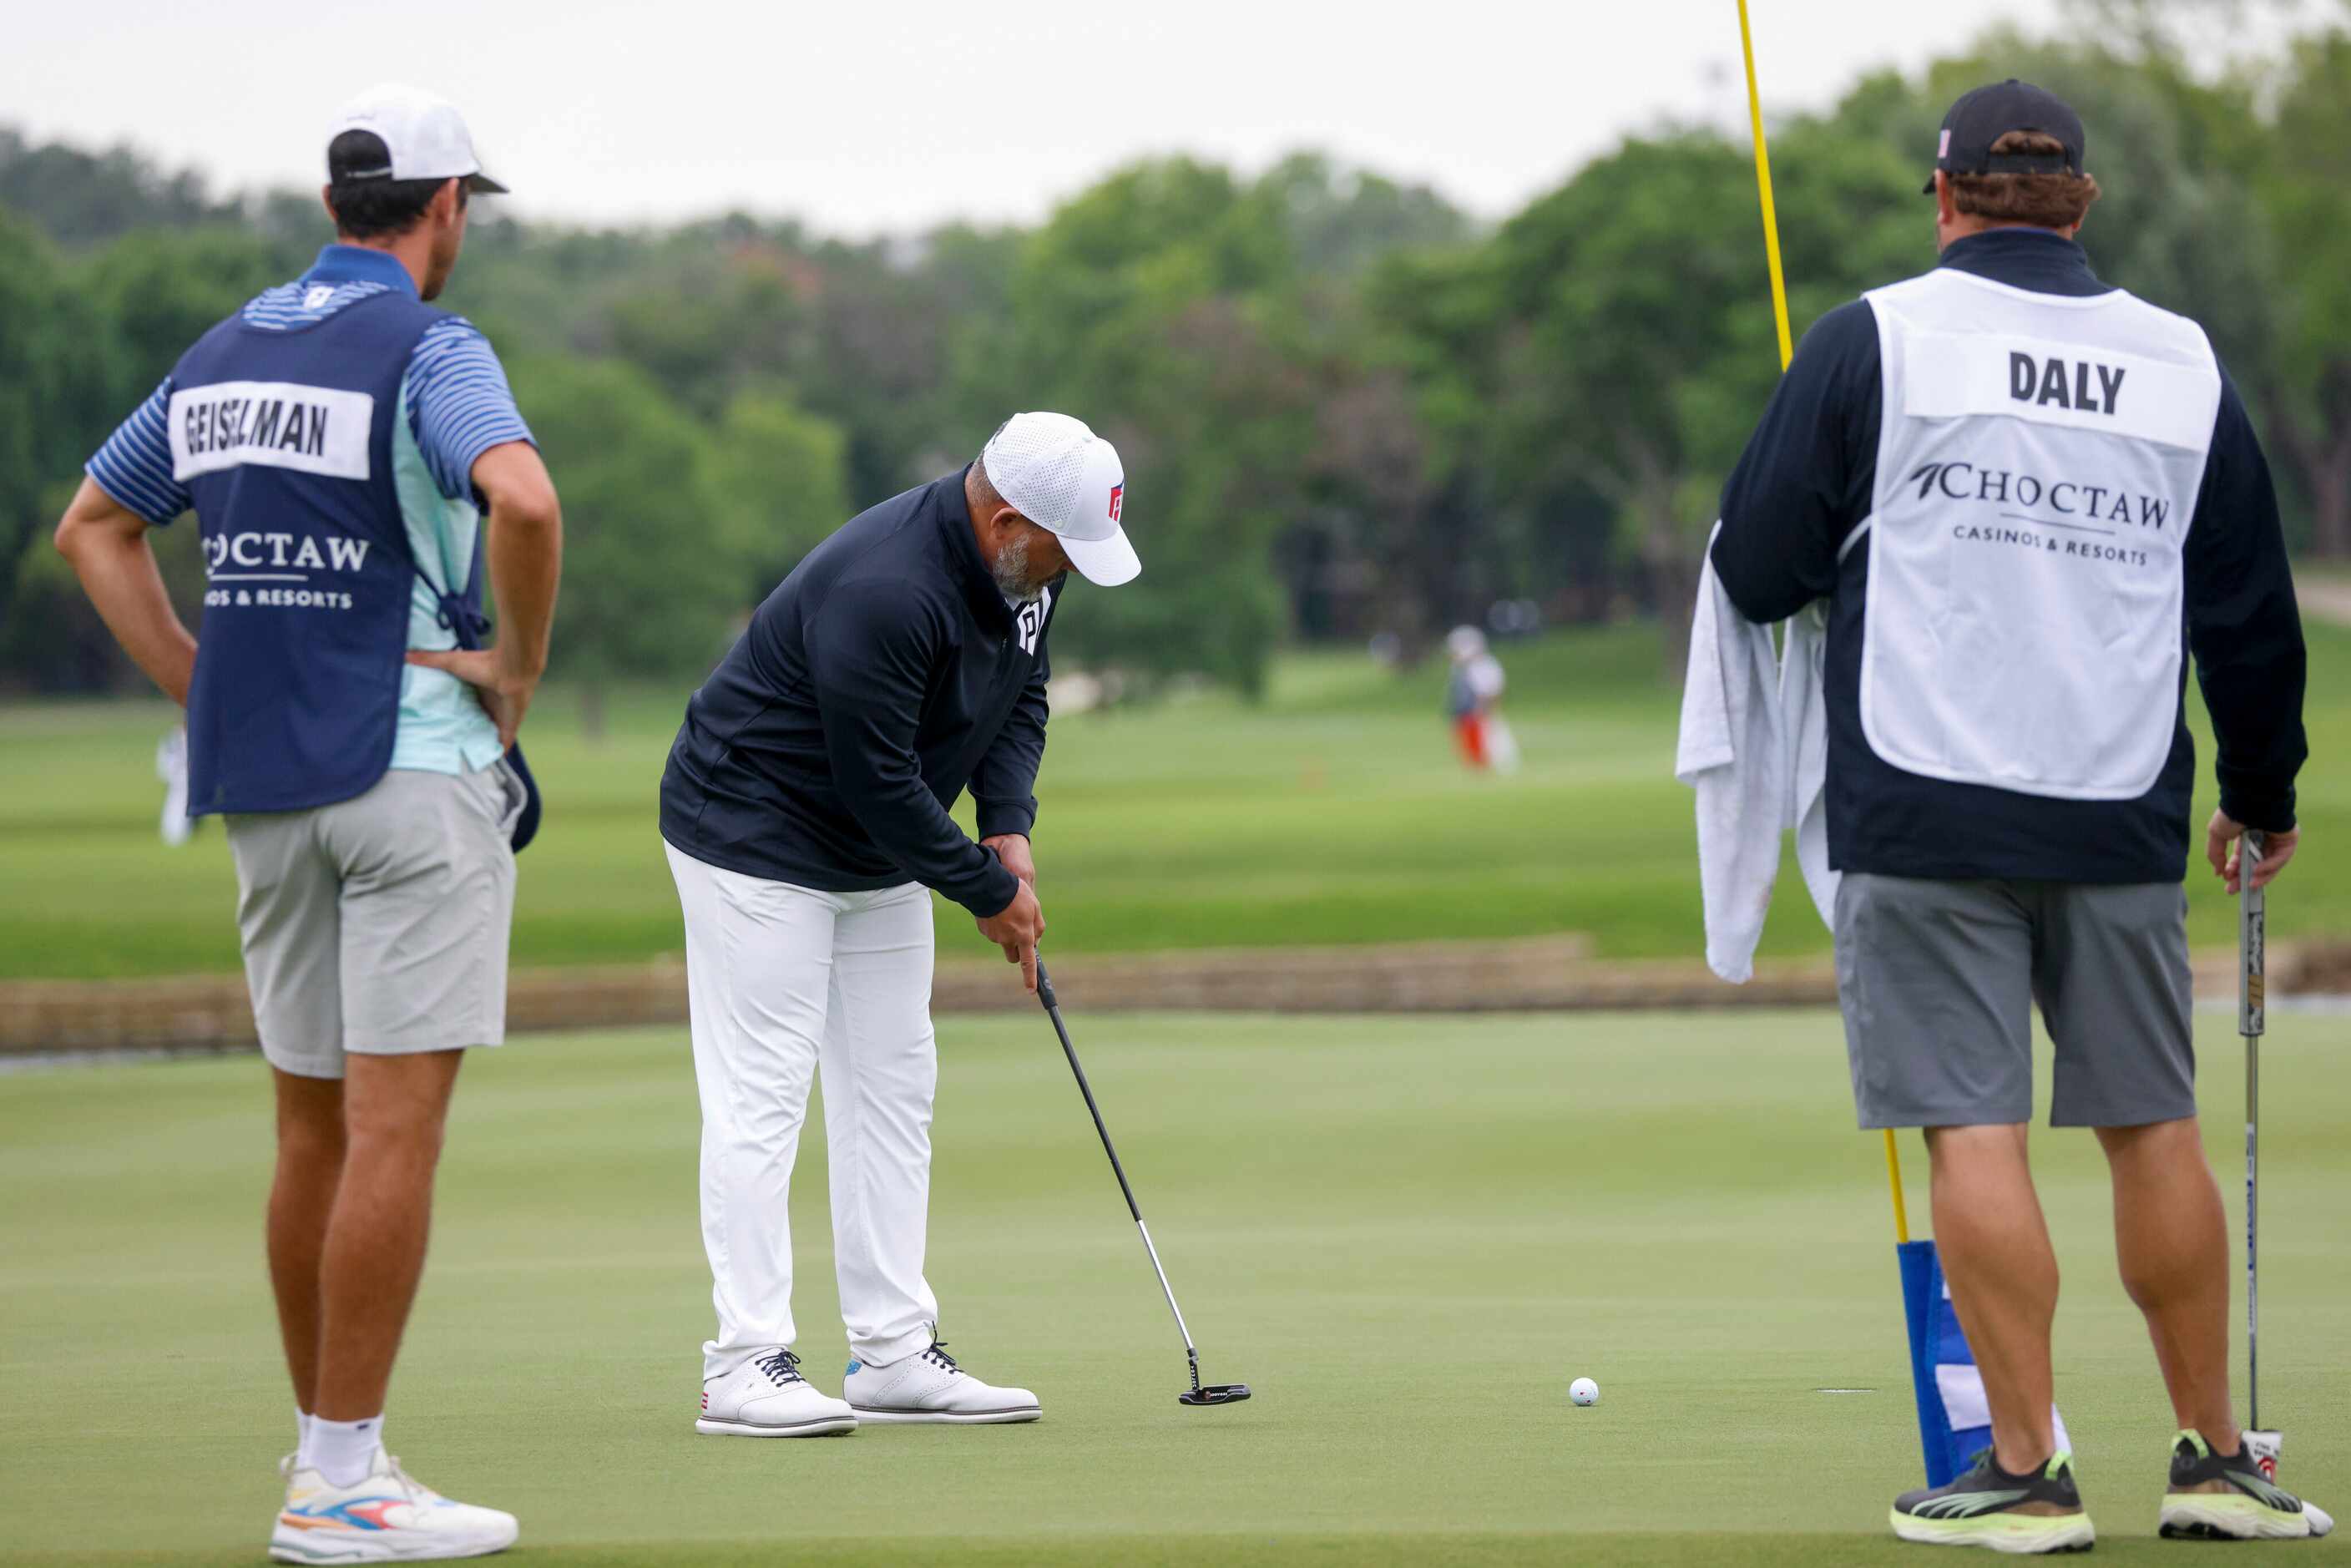 Texas Rangers Hall of Fame catcher Iván “Pudge” Rodríguez putts on the 18th green during the...